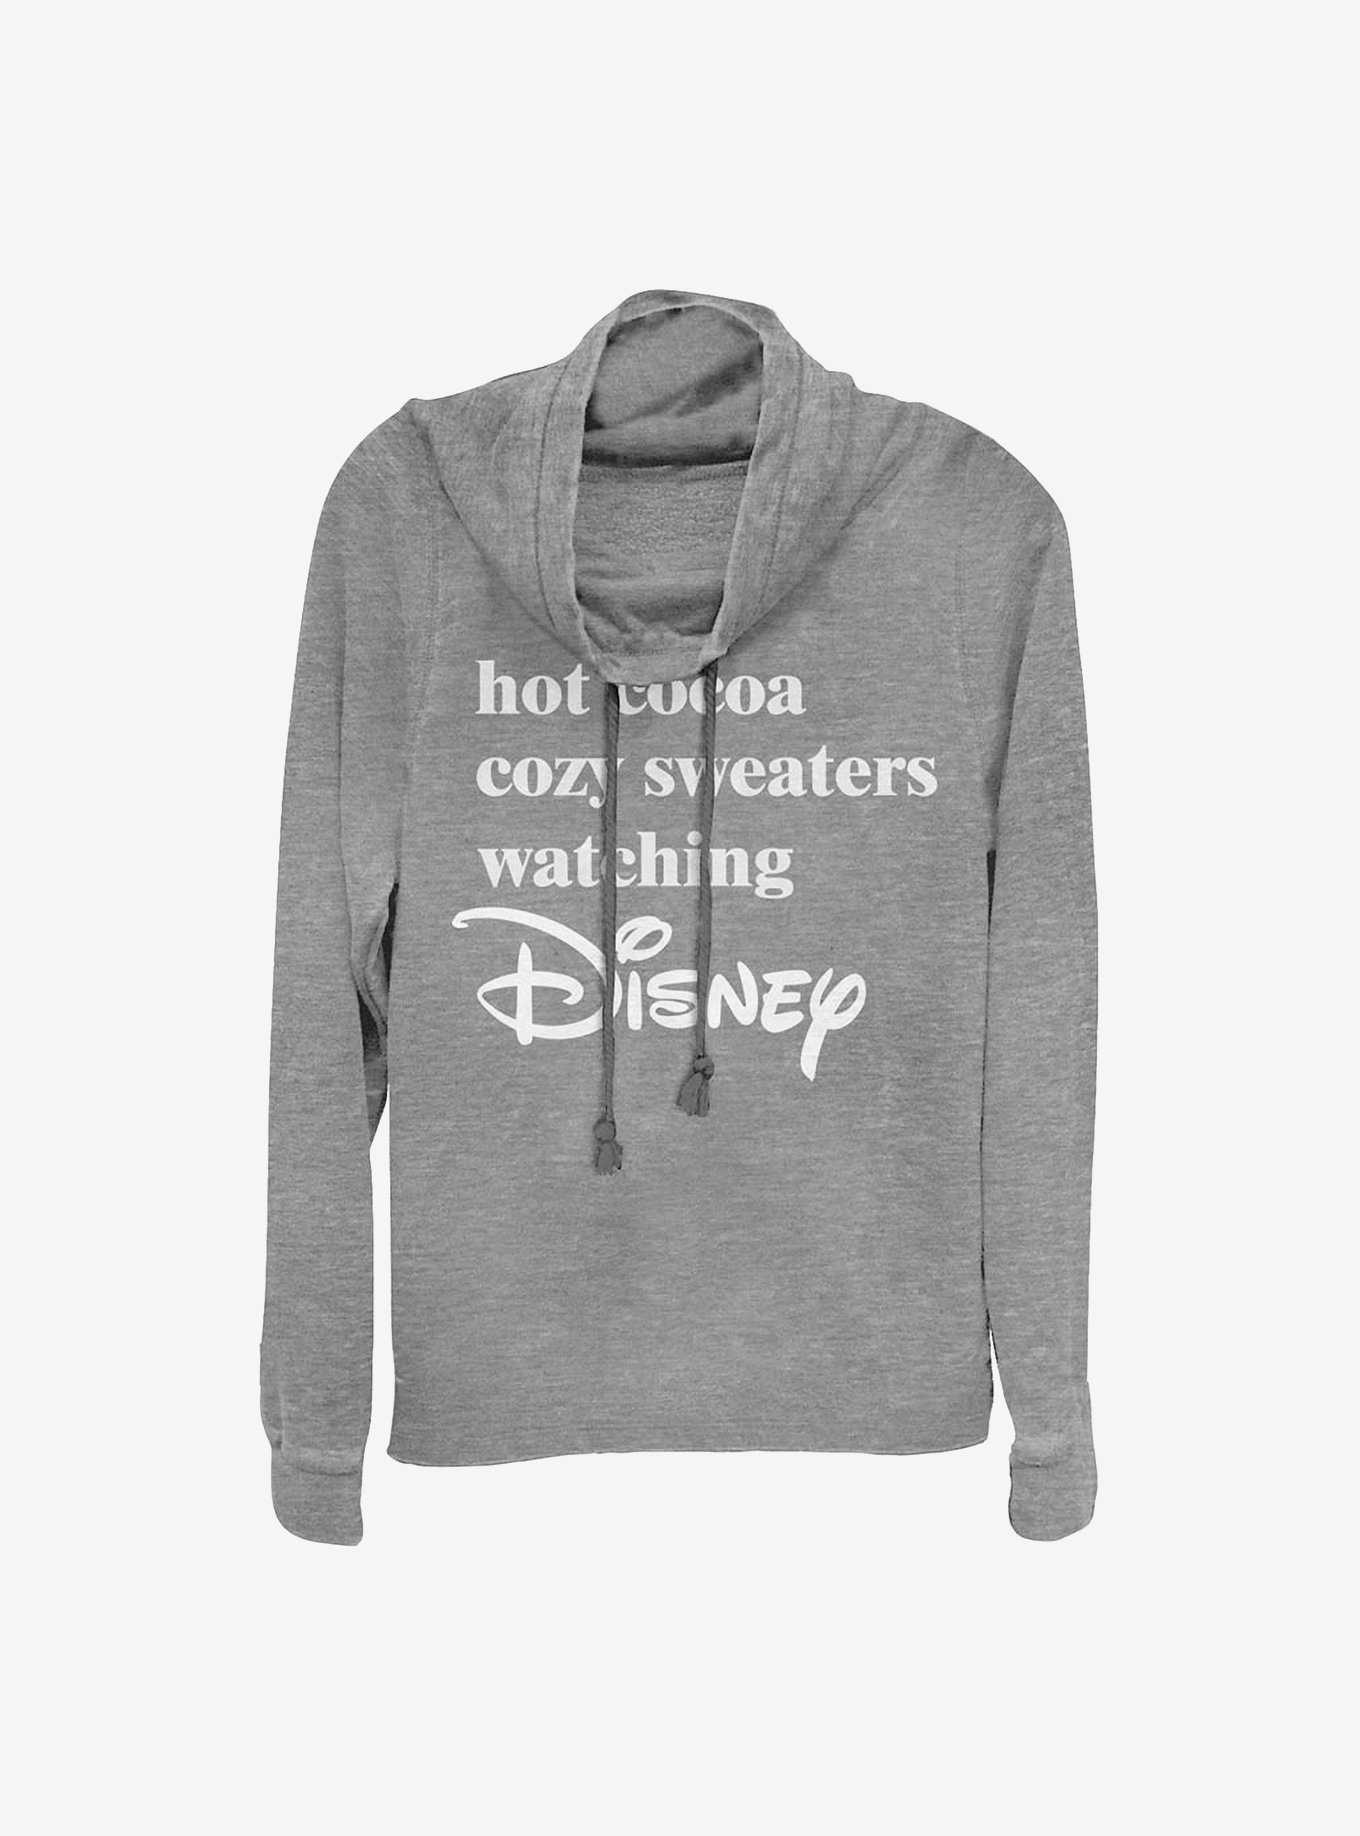 Disney Channel Cozy Vibes Cowlneck Long-Sleeve Girls Top, , hi-res